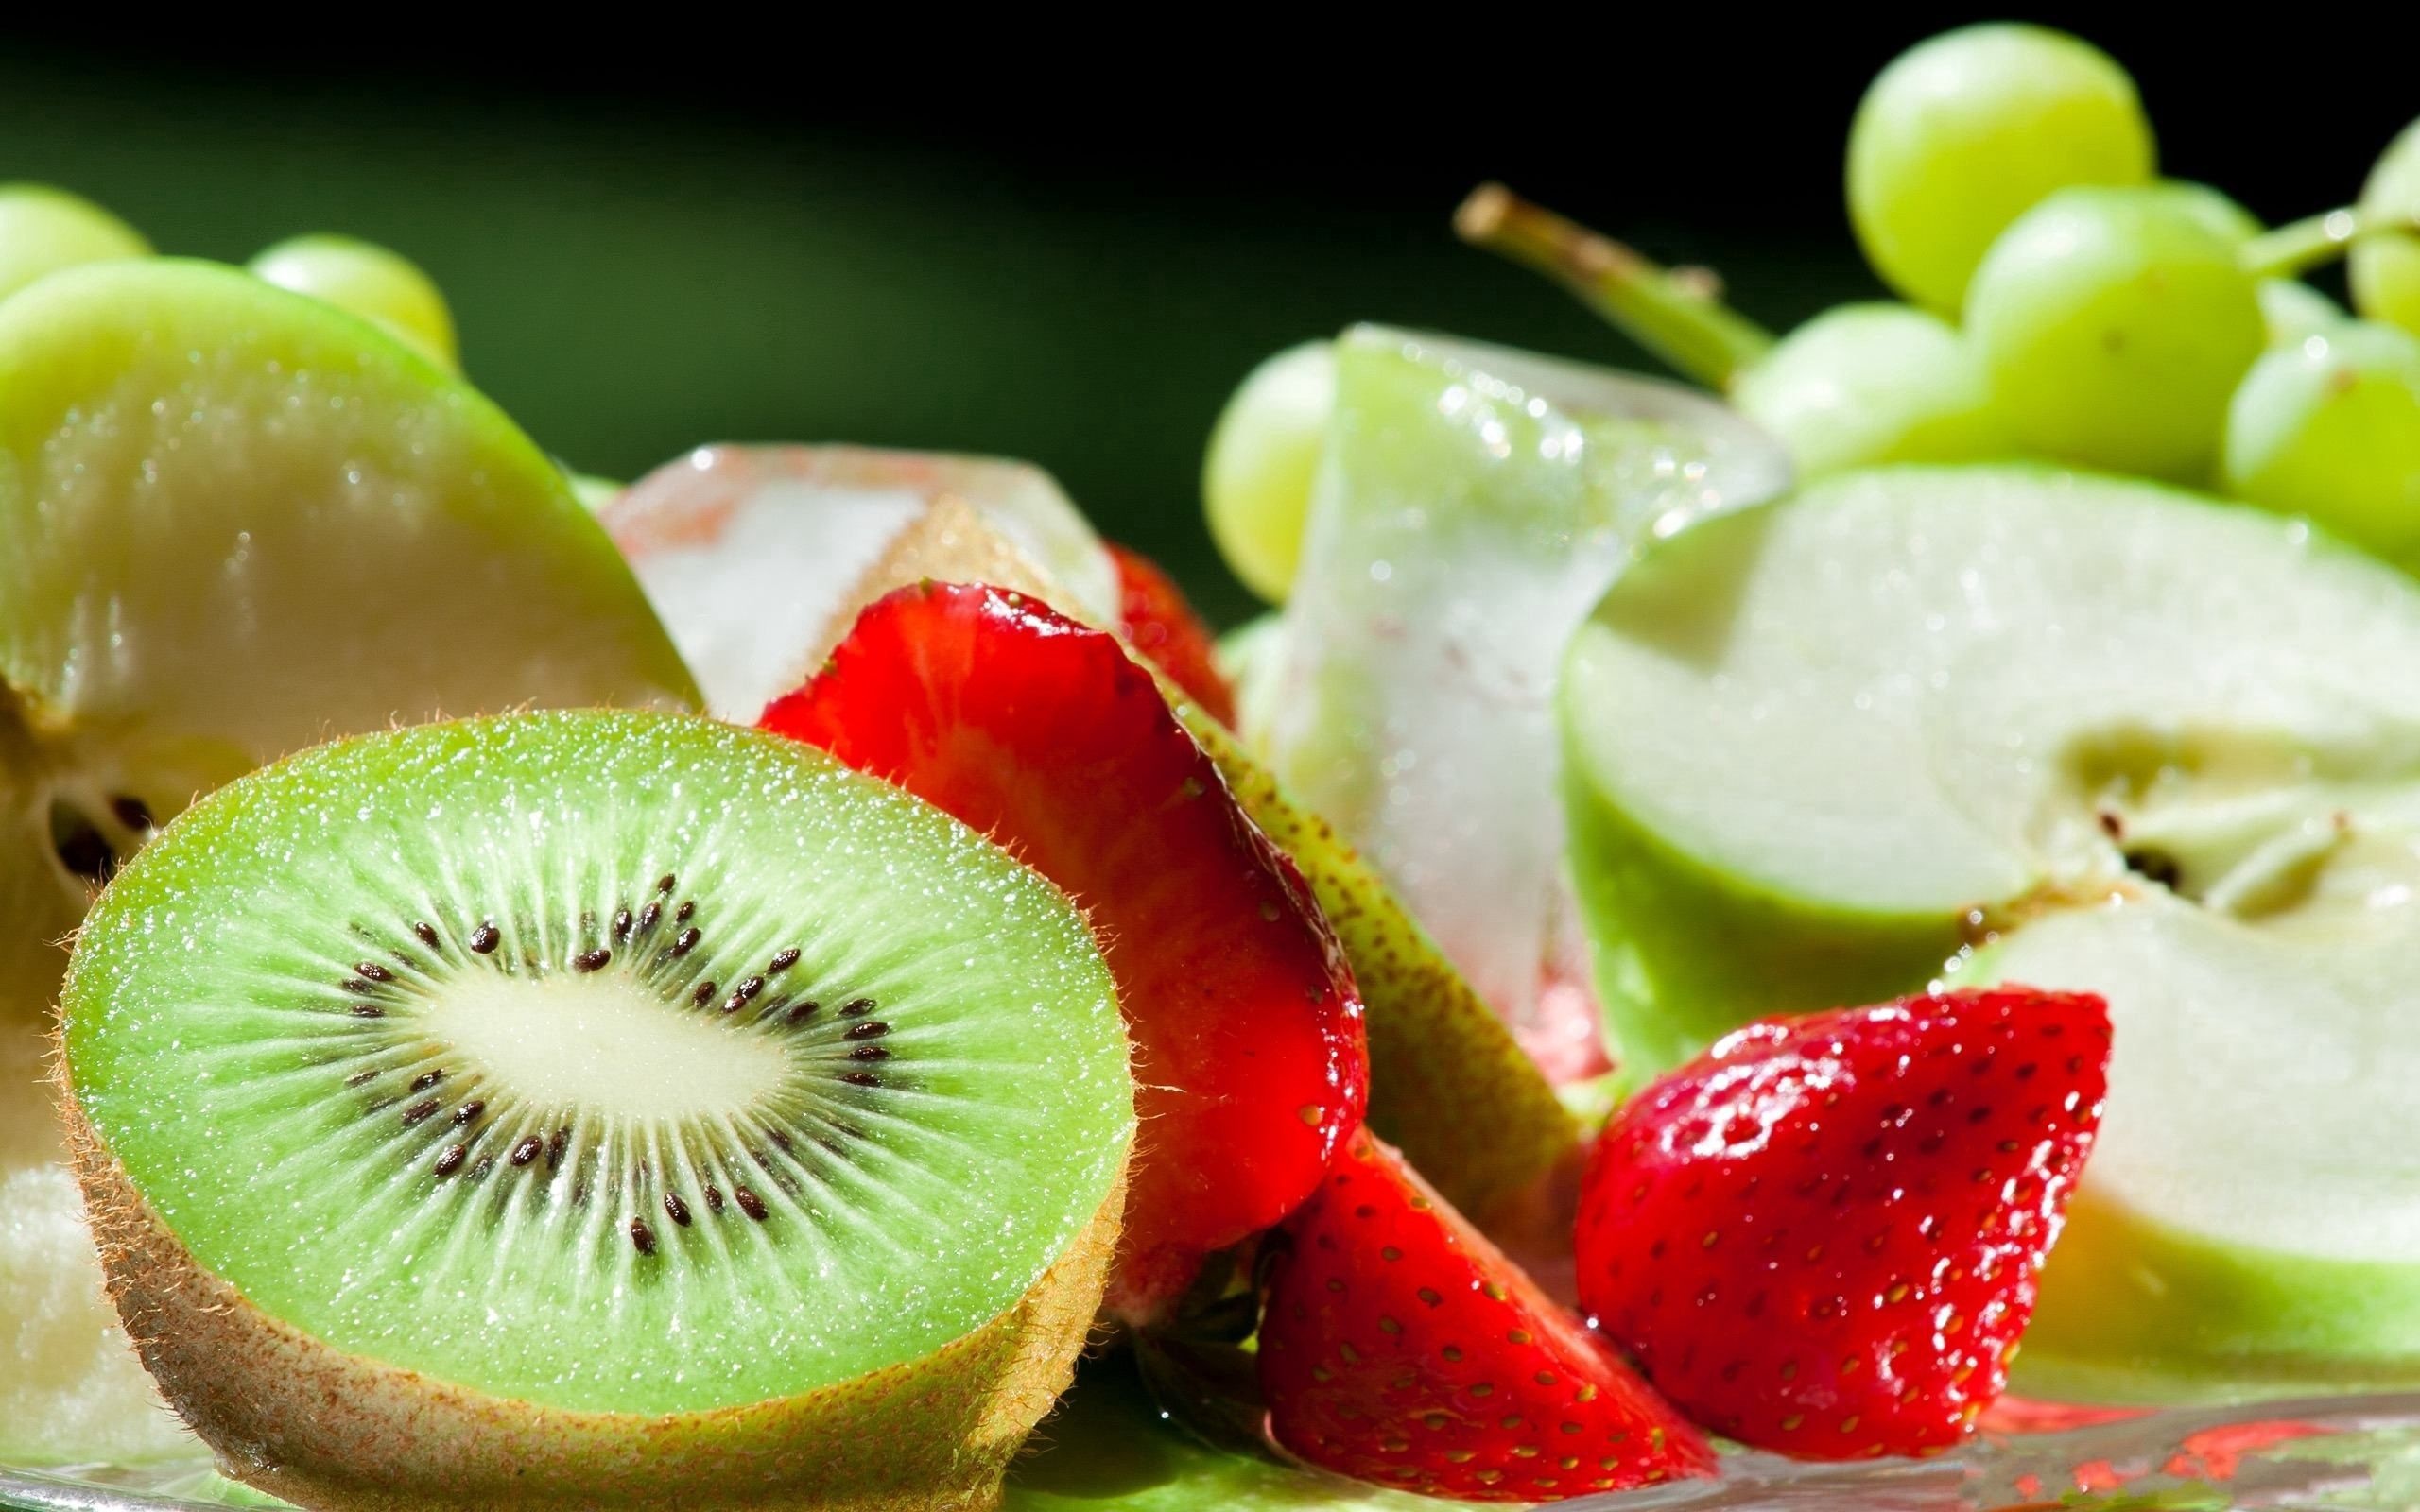 Free download fruit, Fresh and vibrant, Mouth-watering image, Delicious treat, 2560x1600 HD Desktop